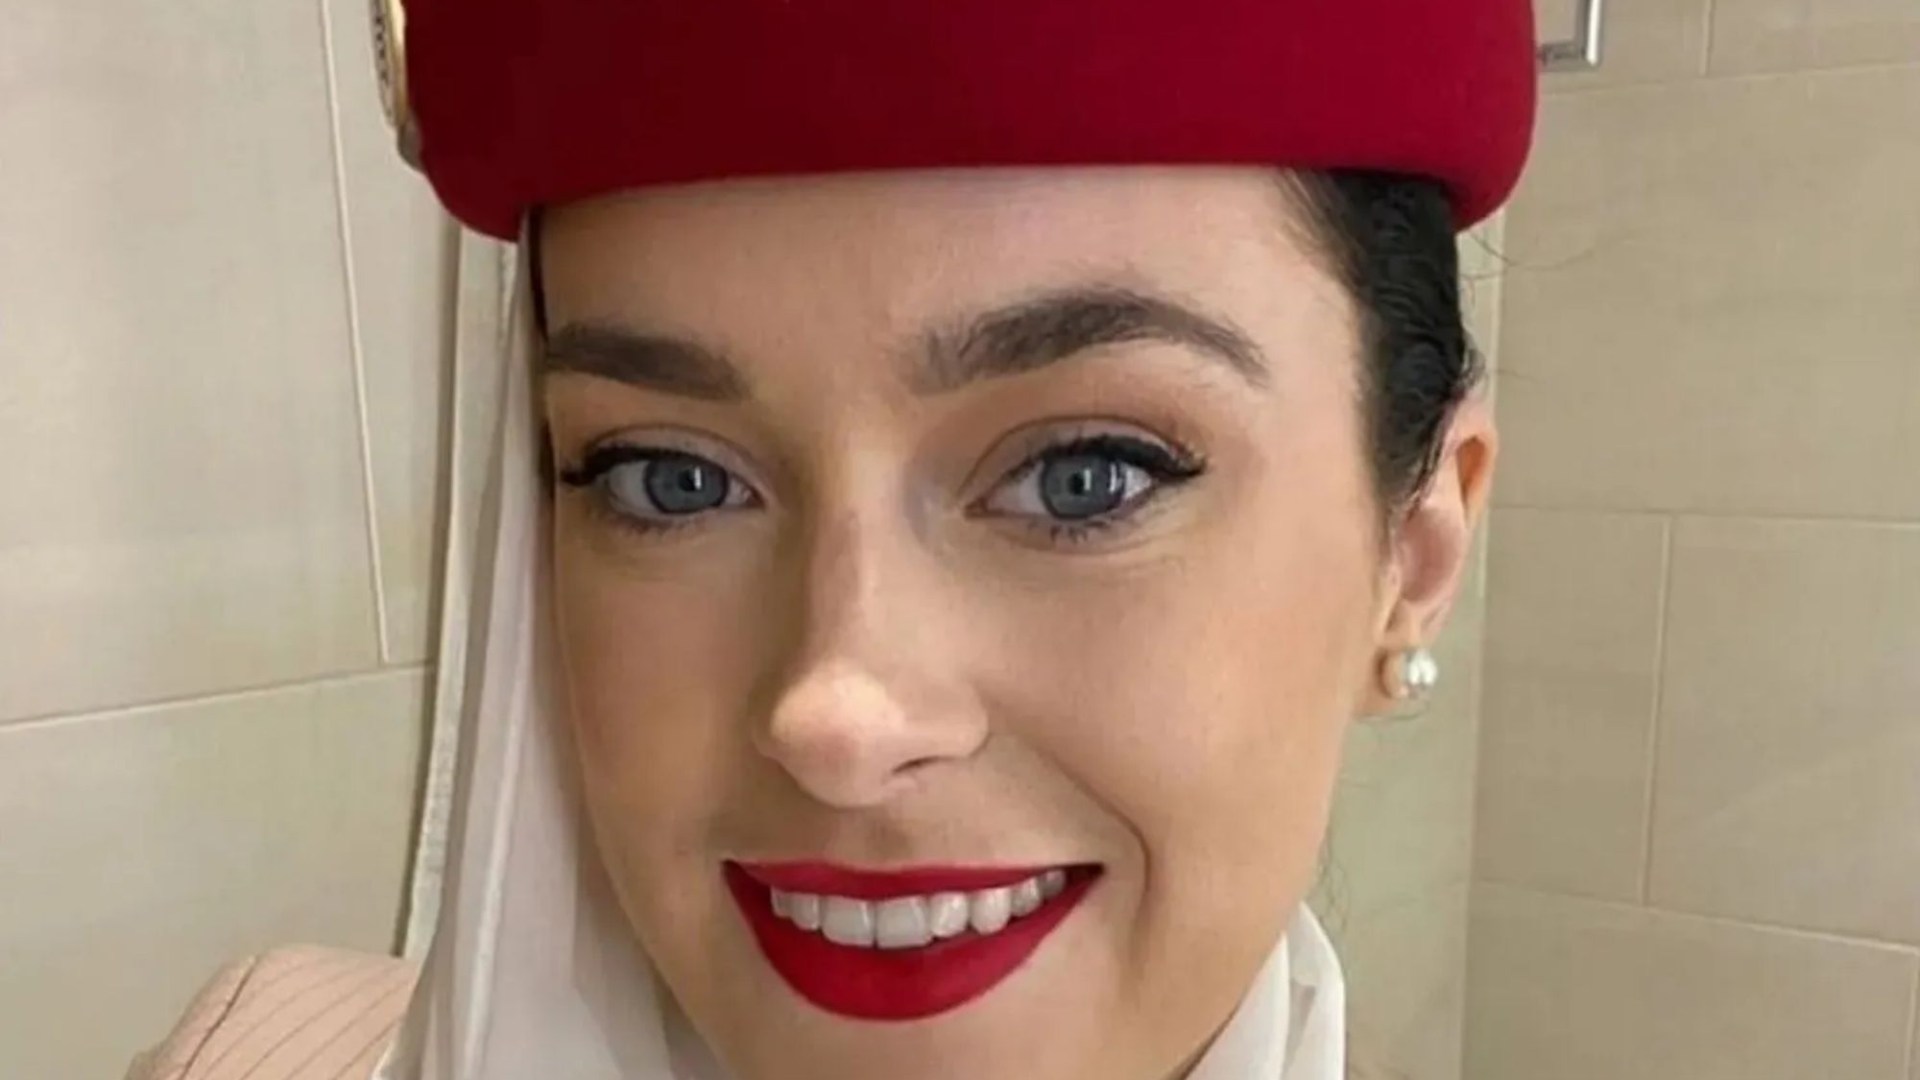 Fears for Irish flight attendant facing jail & trapped in Dubai after horror attack in own home as ordeal details emerge [Video]